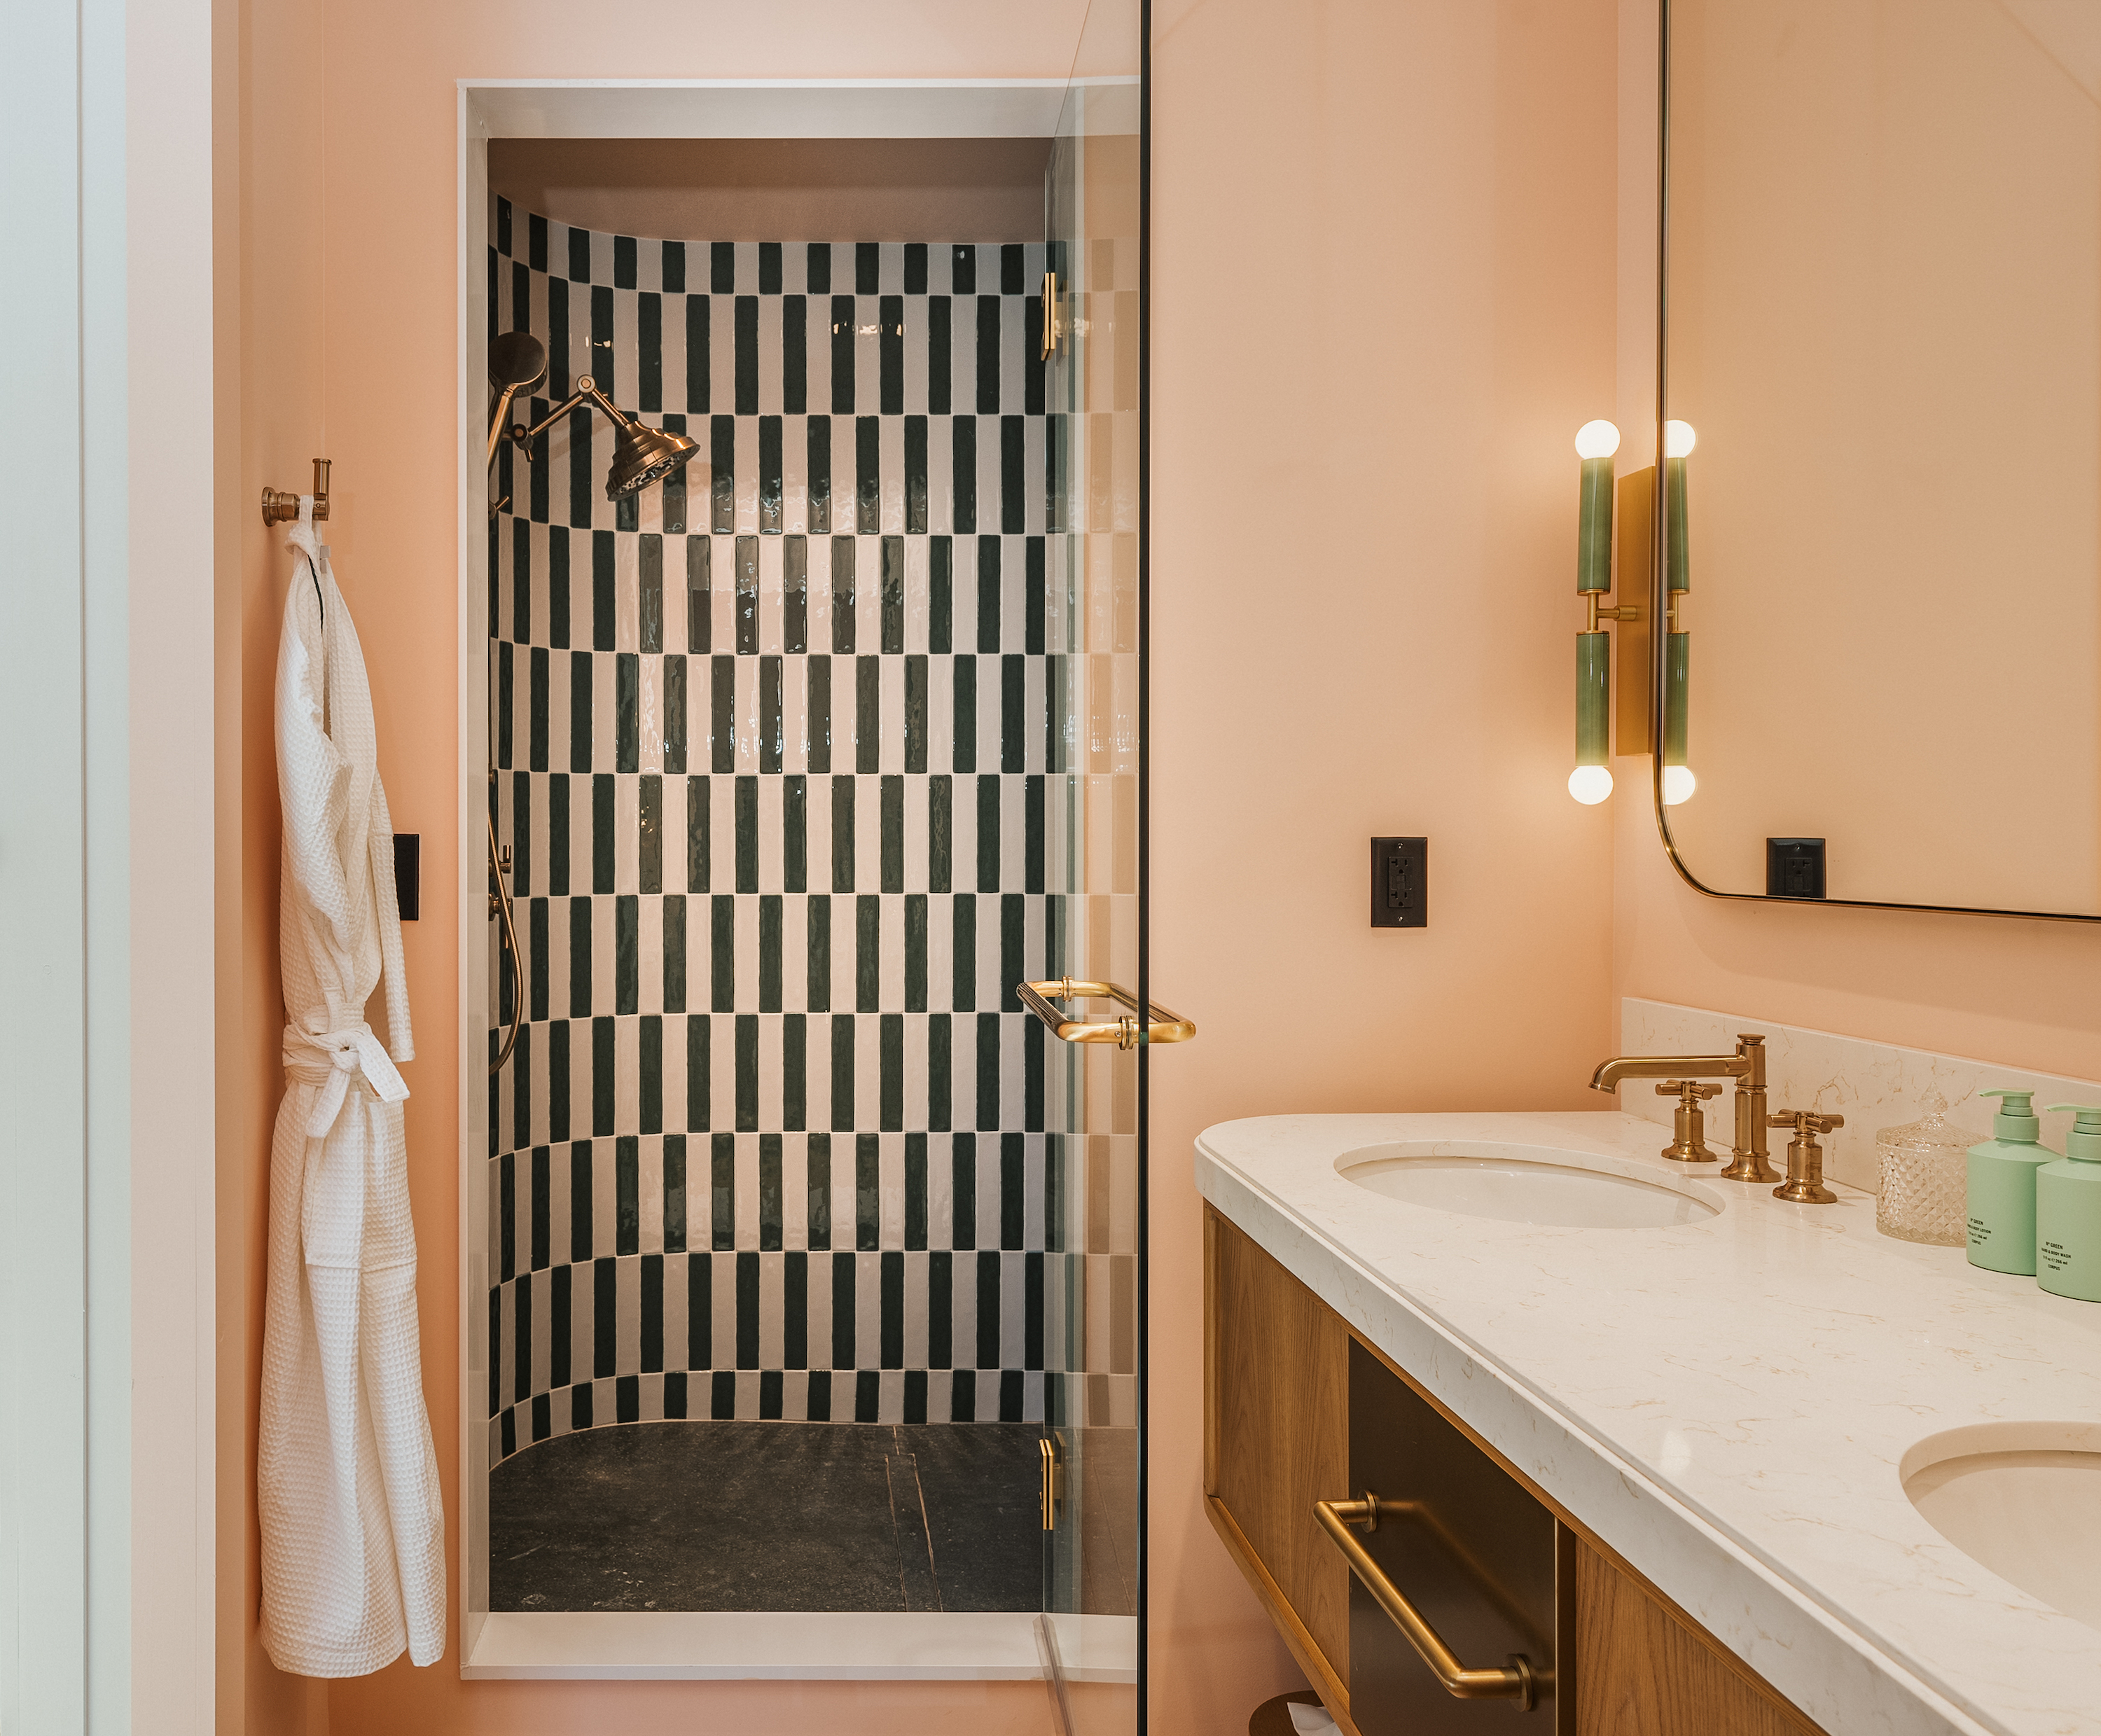 A soft pink bathroom with checkered shower tile.